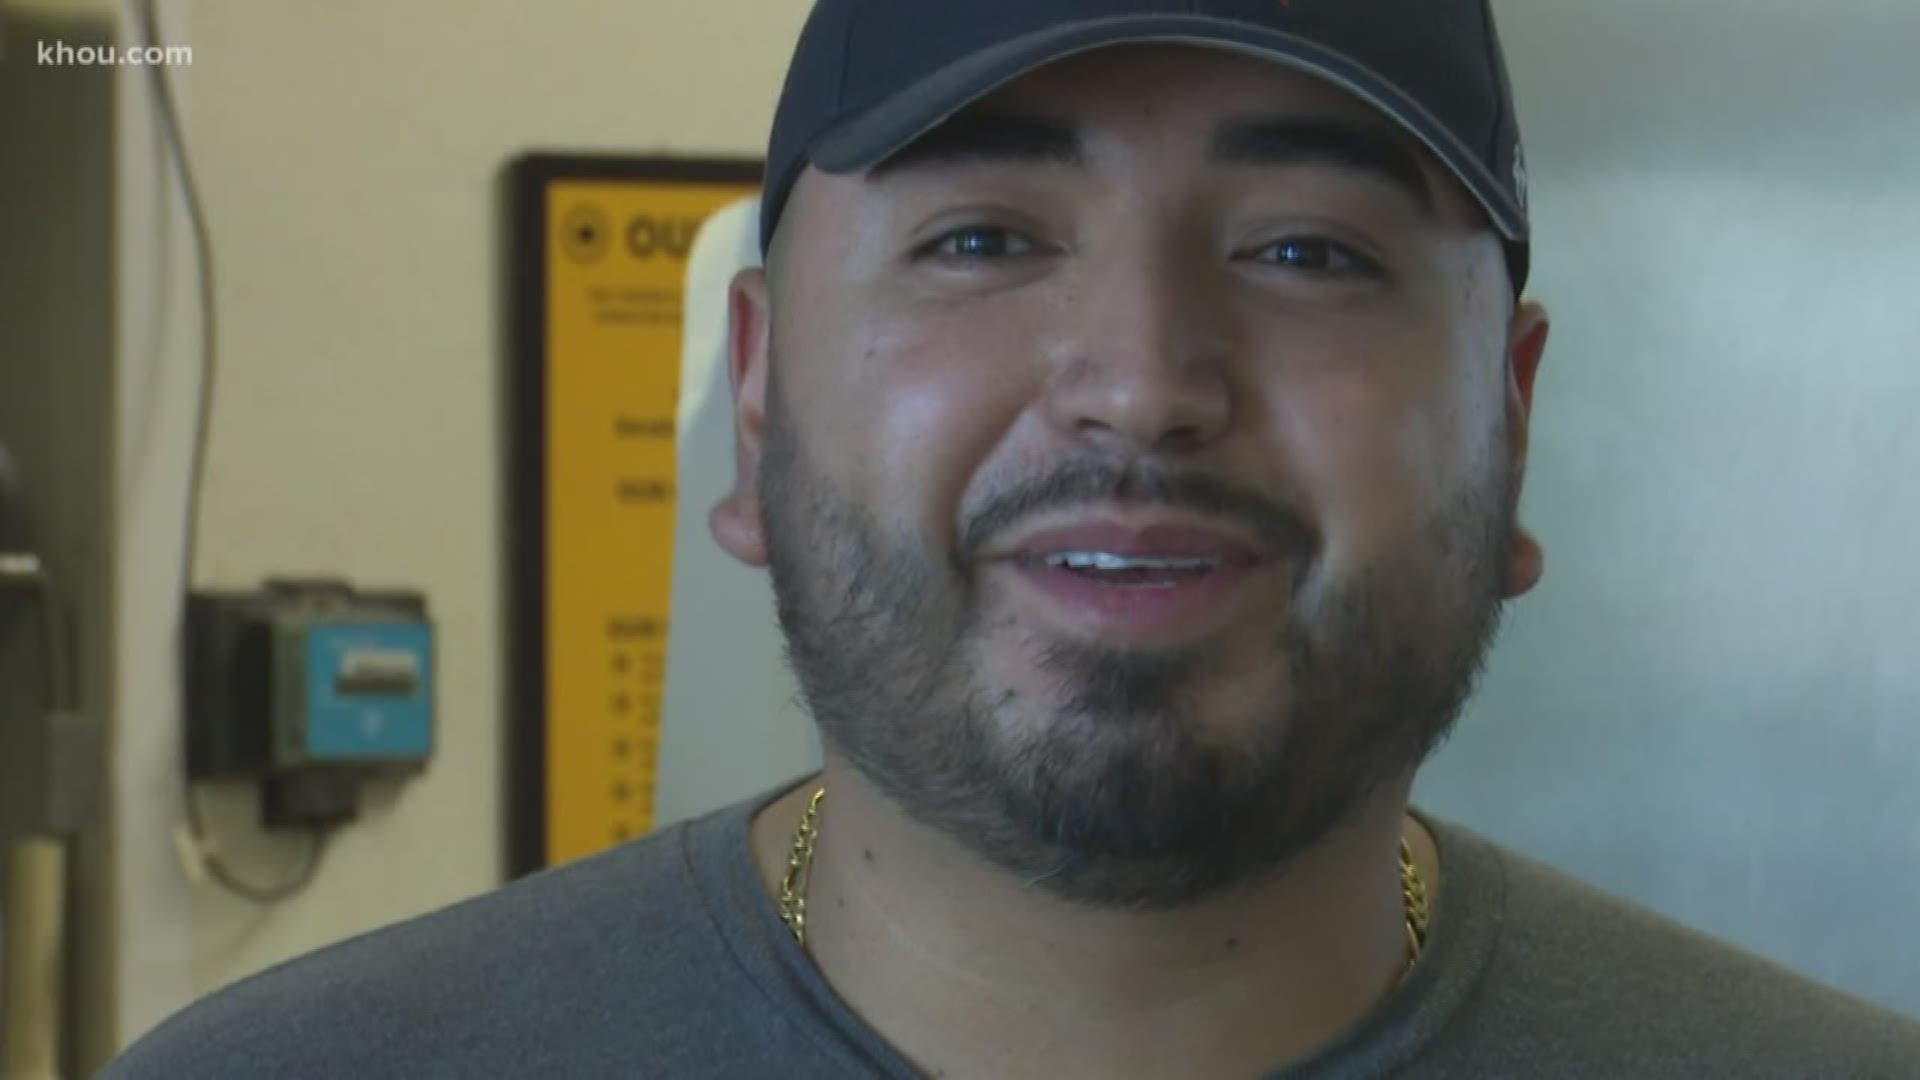 Julio Chavez went from employee to business owner in five years. He dropped out of high school to support his family. But the job sparked a dream.